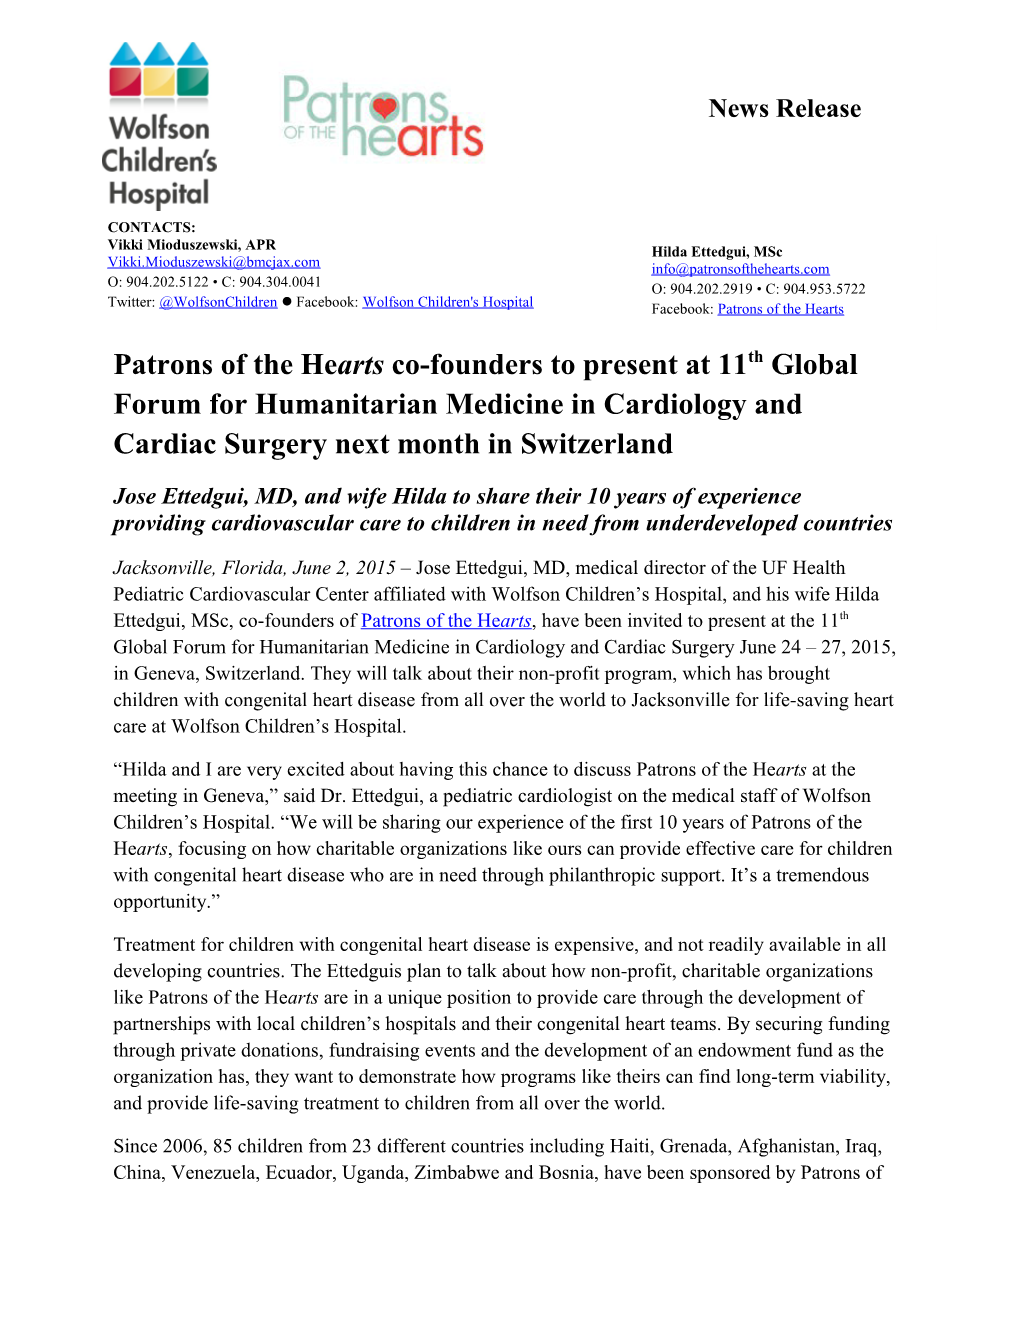 Patrons of the Heartsco-Founders to Present at 11Th Global Forum for Humanitarian Medicine